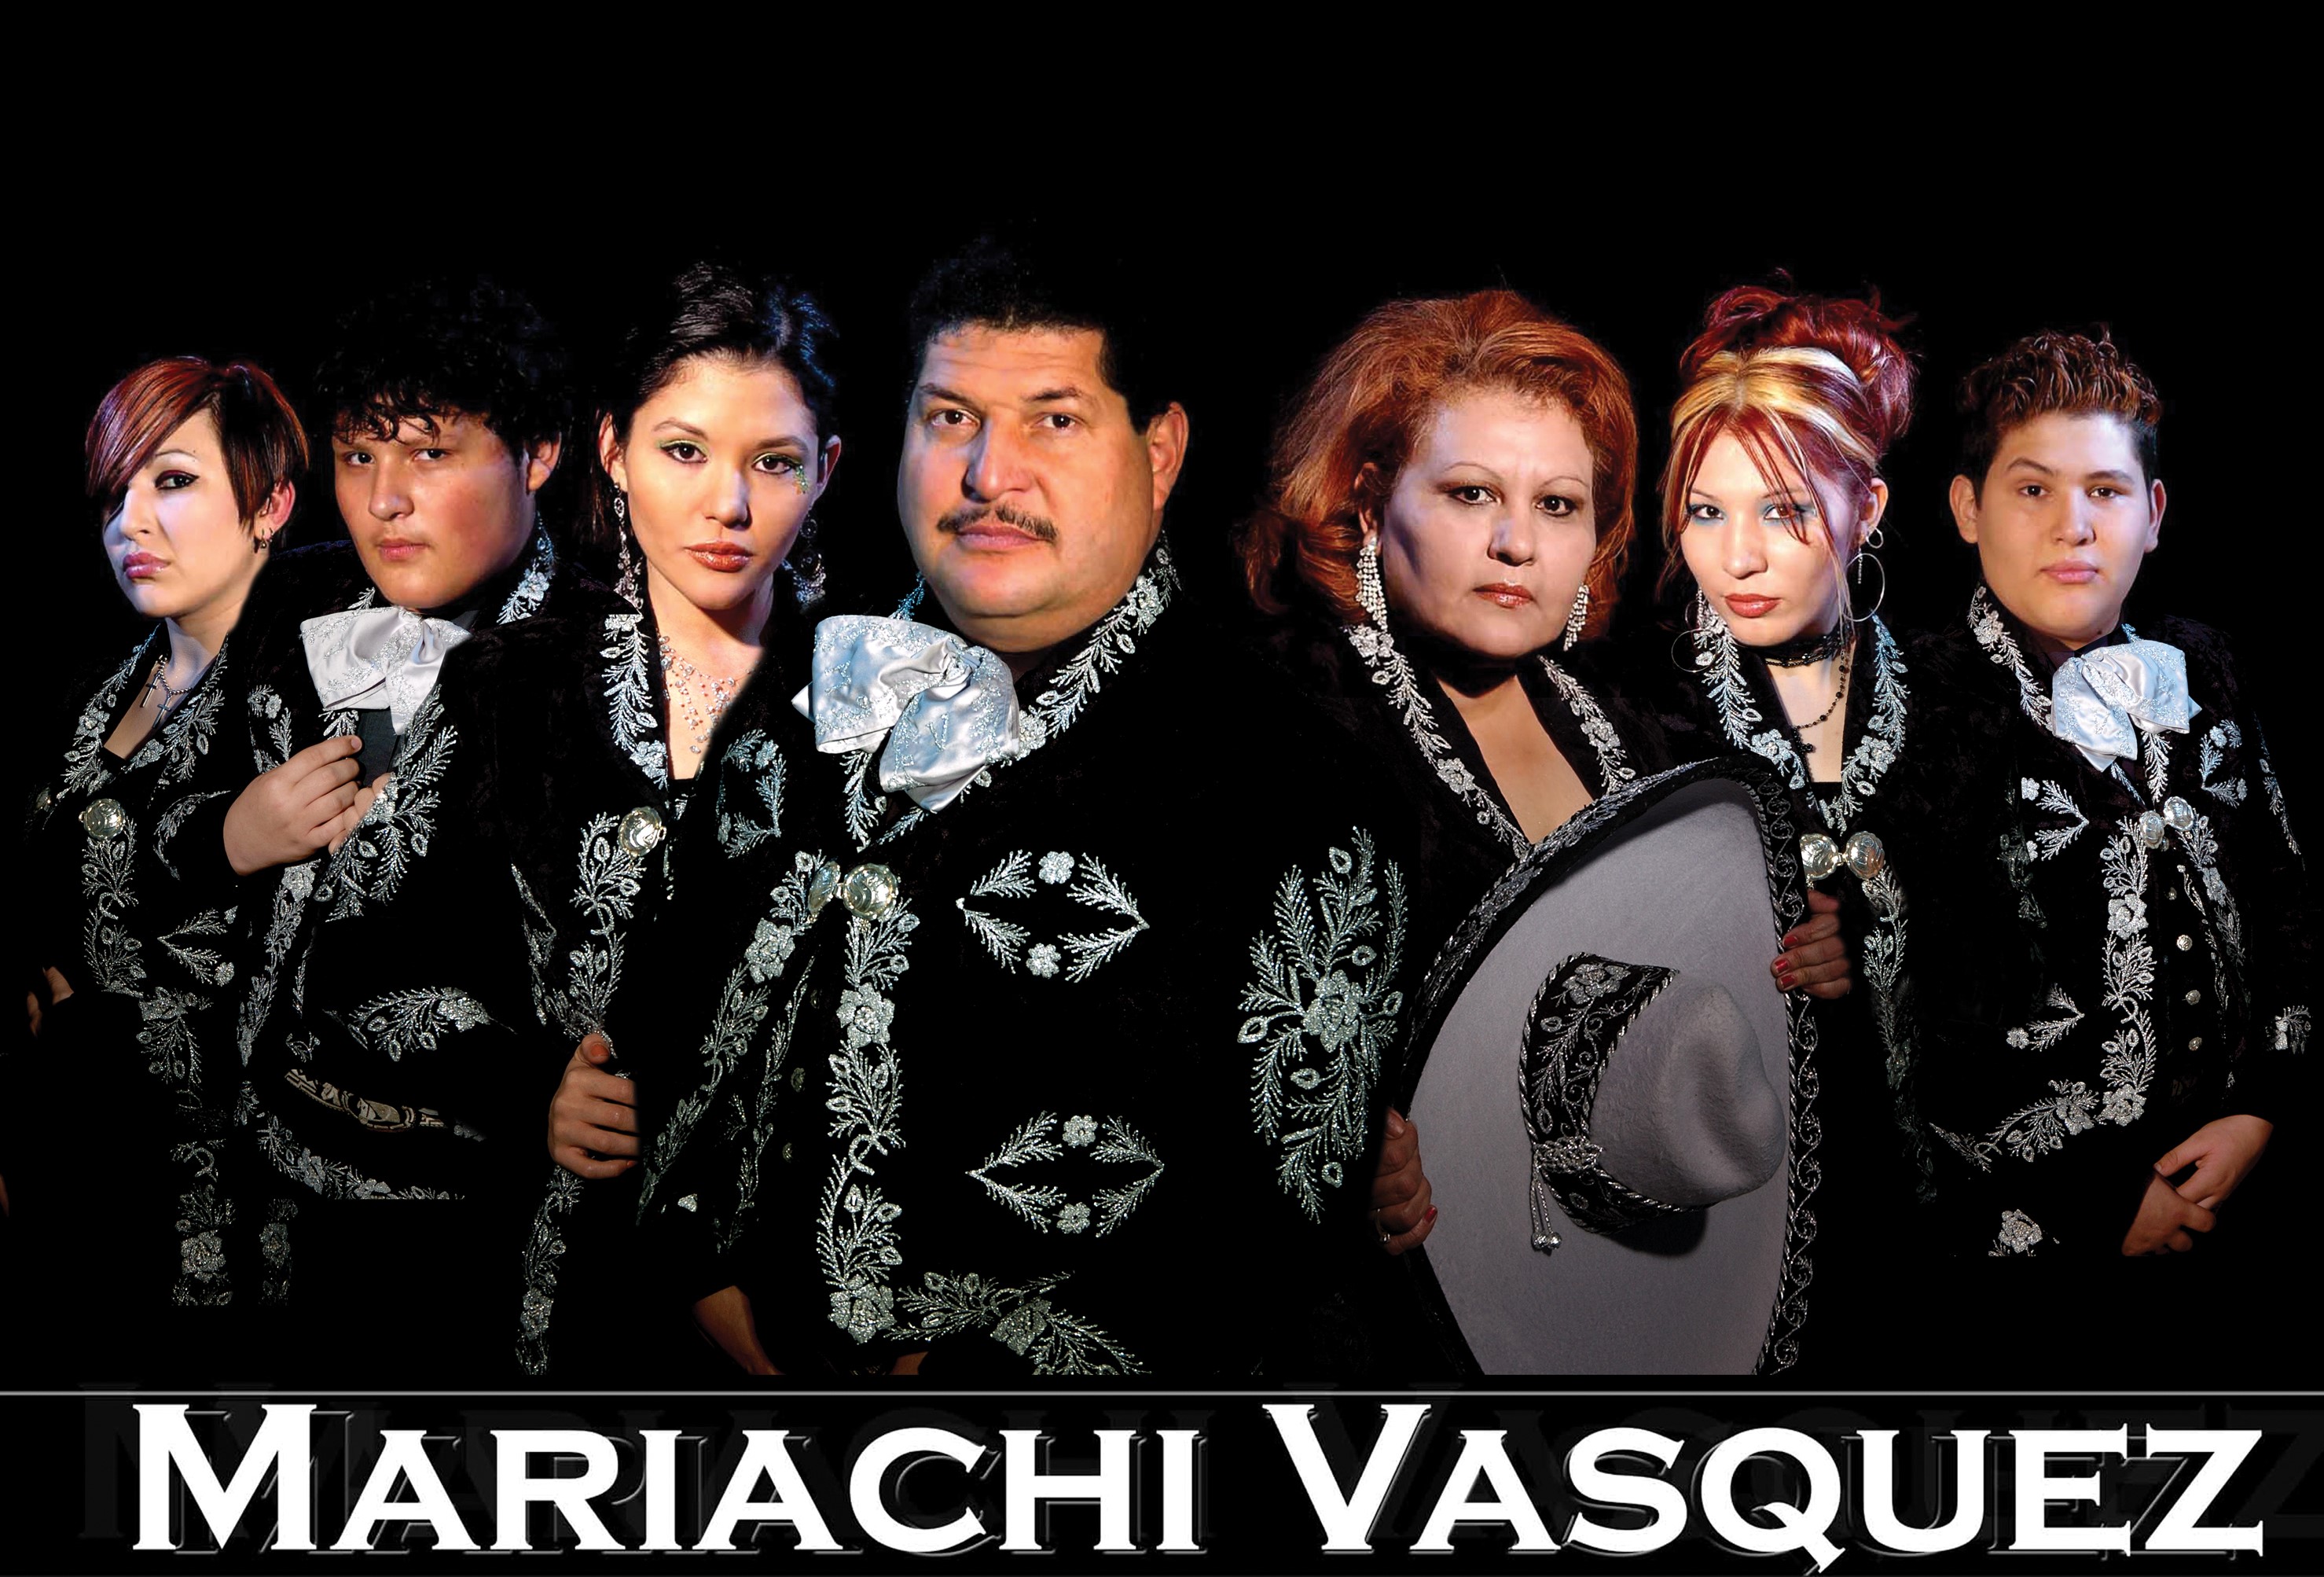 Photo of a group of 7 members of Mariachi Vasquez, as noted at the bottom of the image. The members of the group are wearing ornate black Mariachi outfits, embellished with embroidered white flowers on the collars, sleeves, on the jacket fronts and along the plackets. The males also wear a large white bow tie, one of the women holds a white sombrero trimmed in black. The background of the photo is all black.